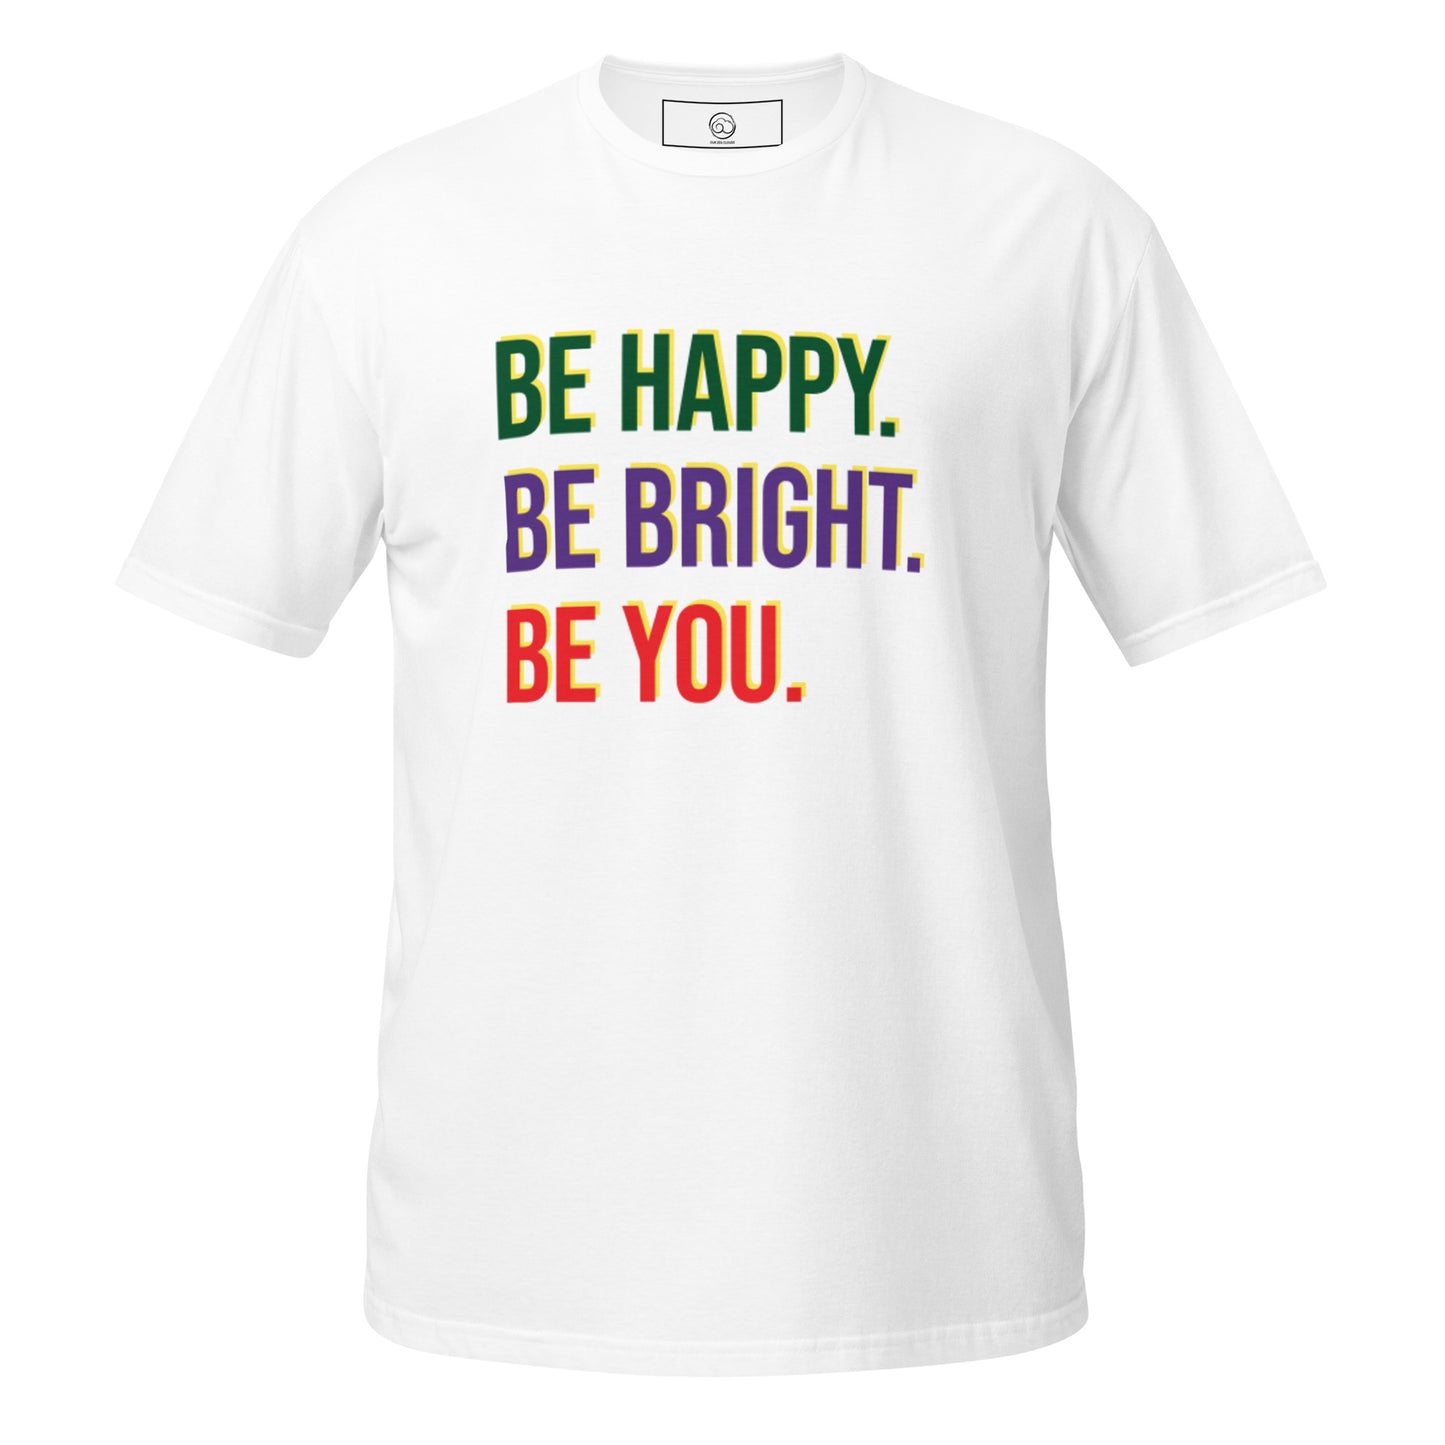 Be Bright. Be Happy. Be You Short-Sleeve T-Shirt